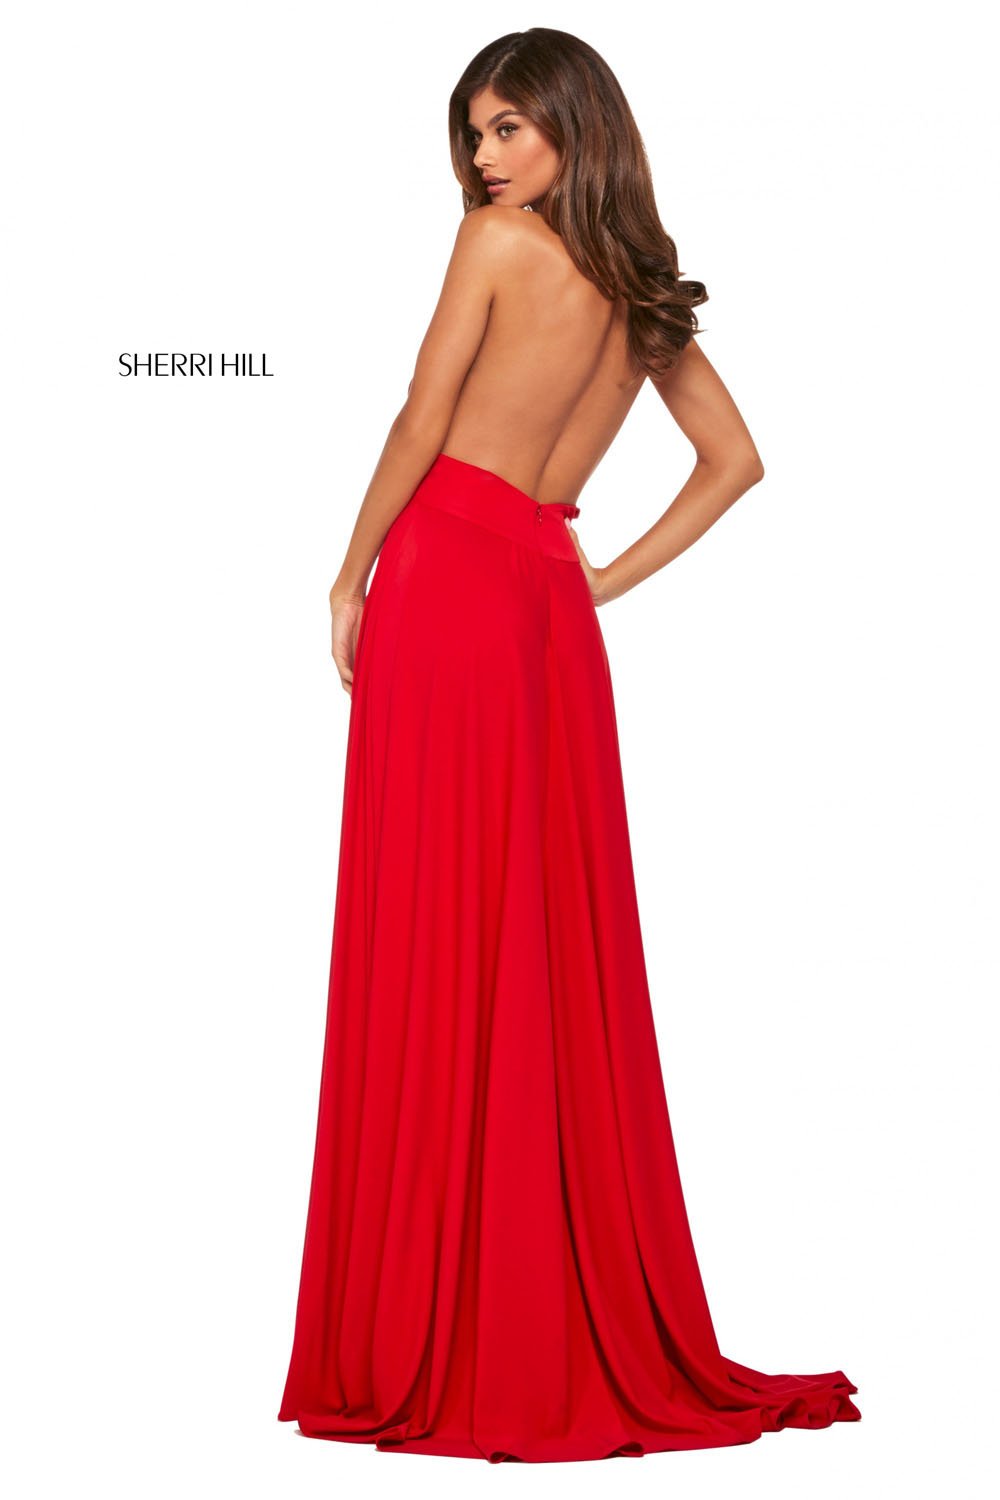 Sherri Hill 53577 dress images in these colors: Aqua, Ivory, Navy, Red, Coral, Blush, Black, Royal.